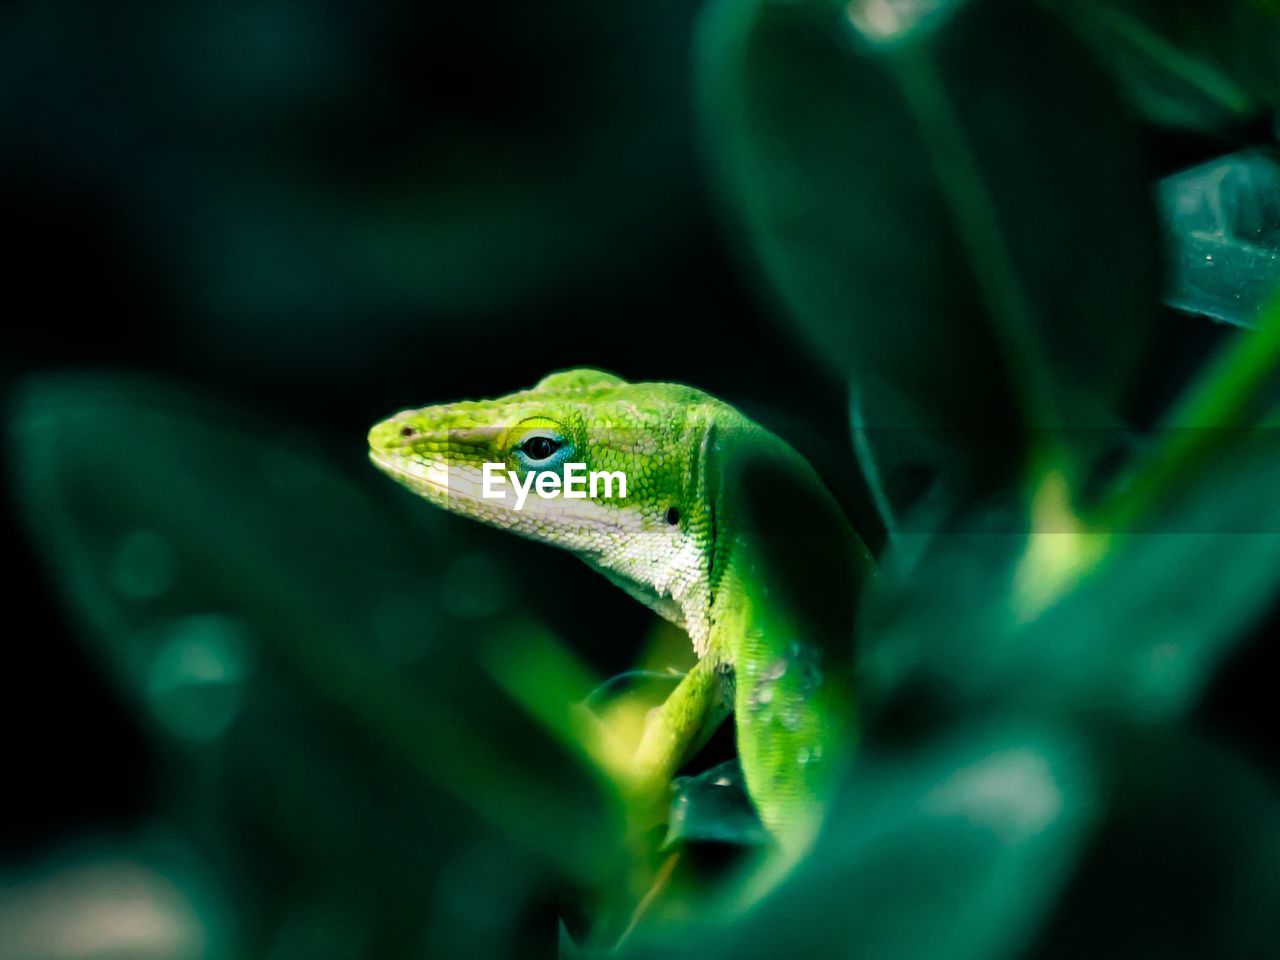 Close-up of reptile amidst plants